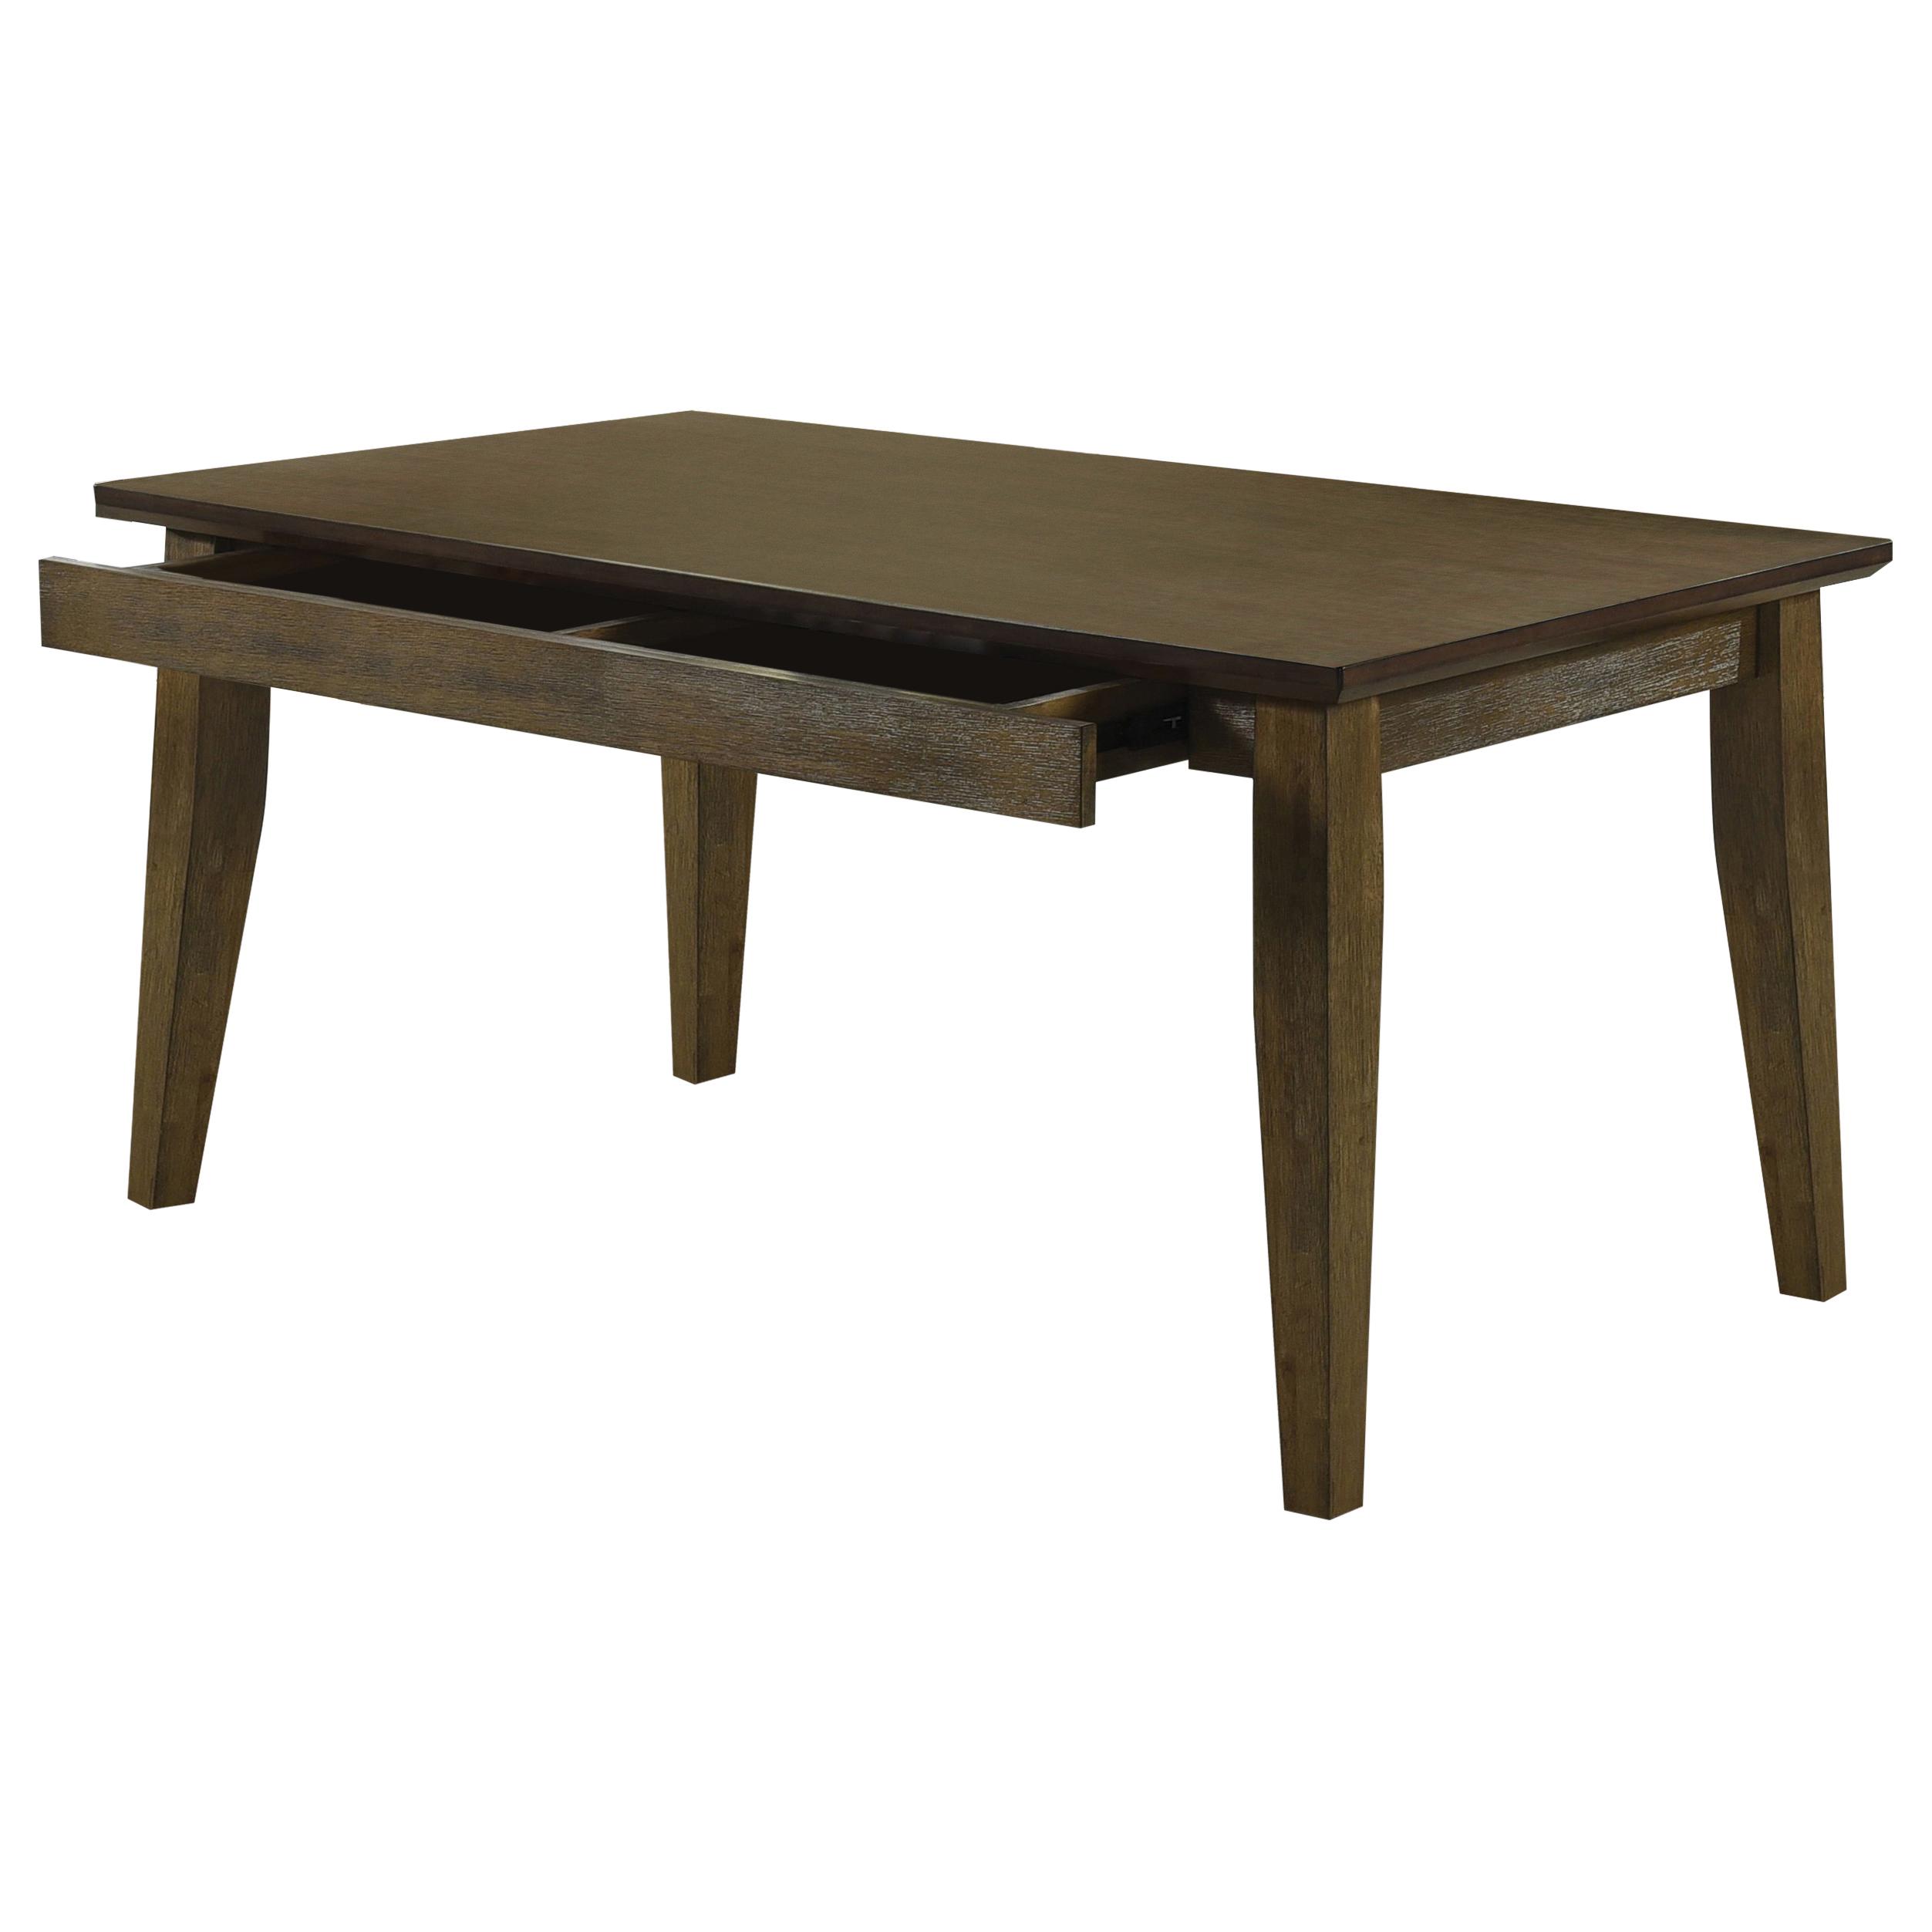 Transitional Dining Table 110731 Rayleene 110731 in Medium Brown 